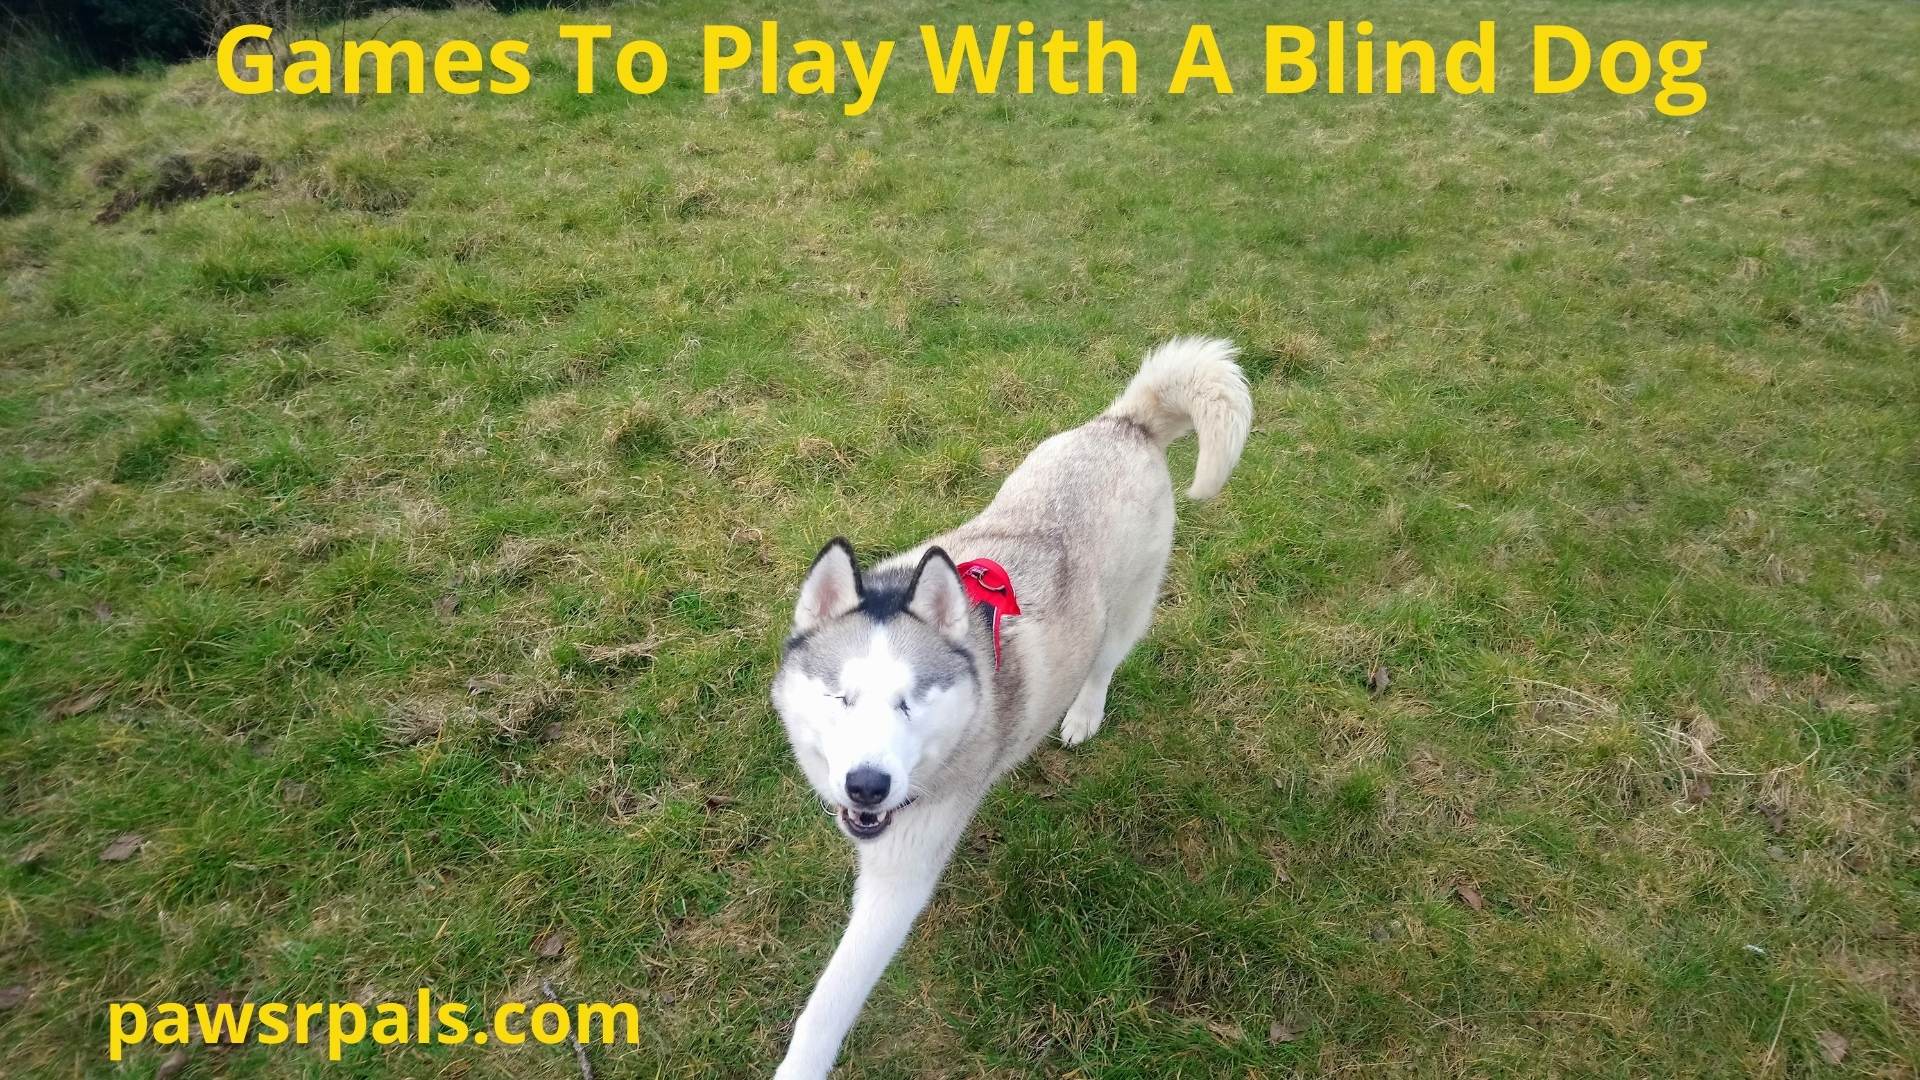 Games To Play With A Blind Dog